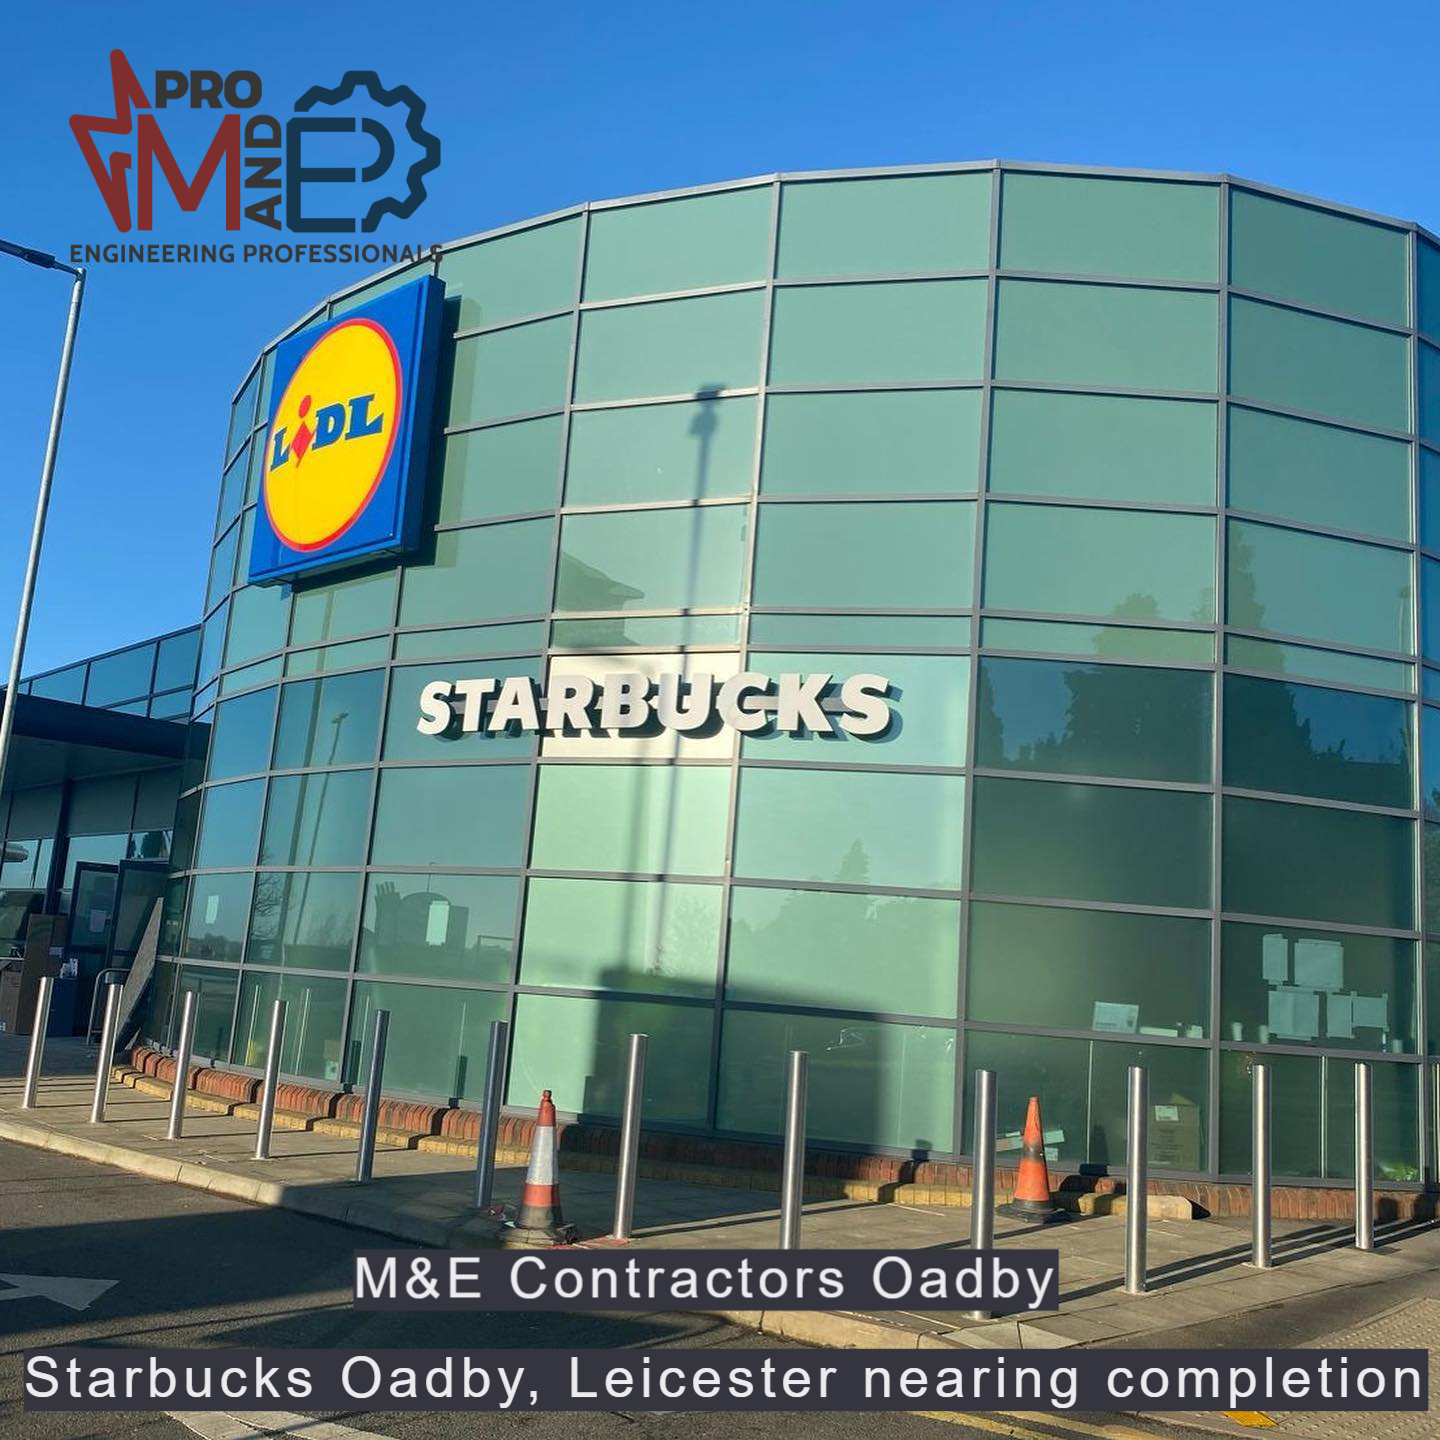 Starbucks project in Oadby, Leicester - M&E Pro